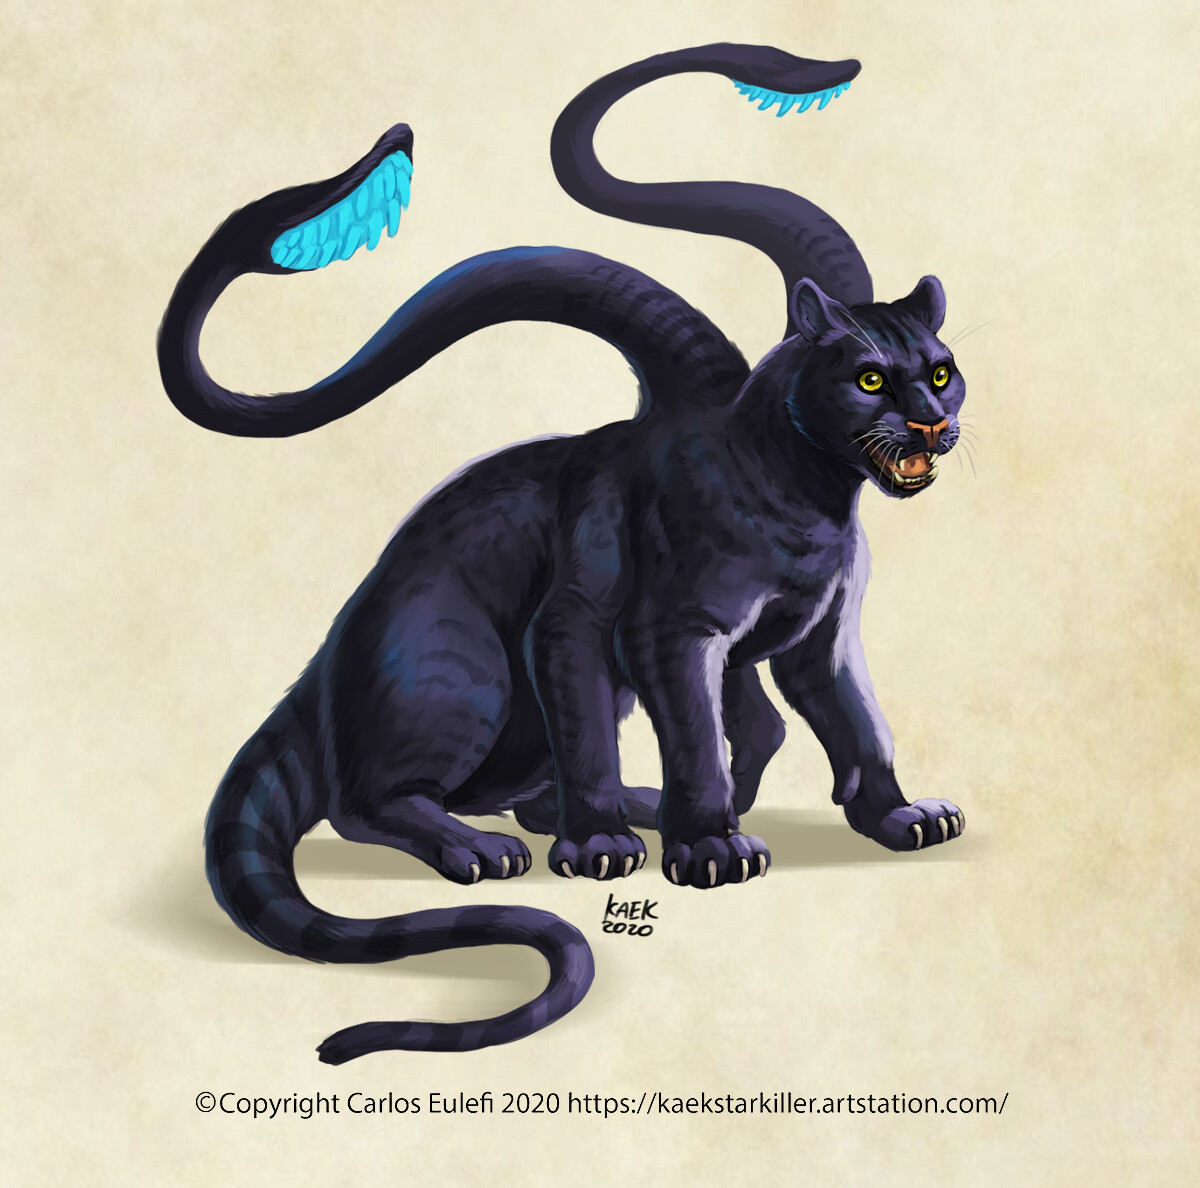 Finished image a happy displacer beast!